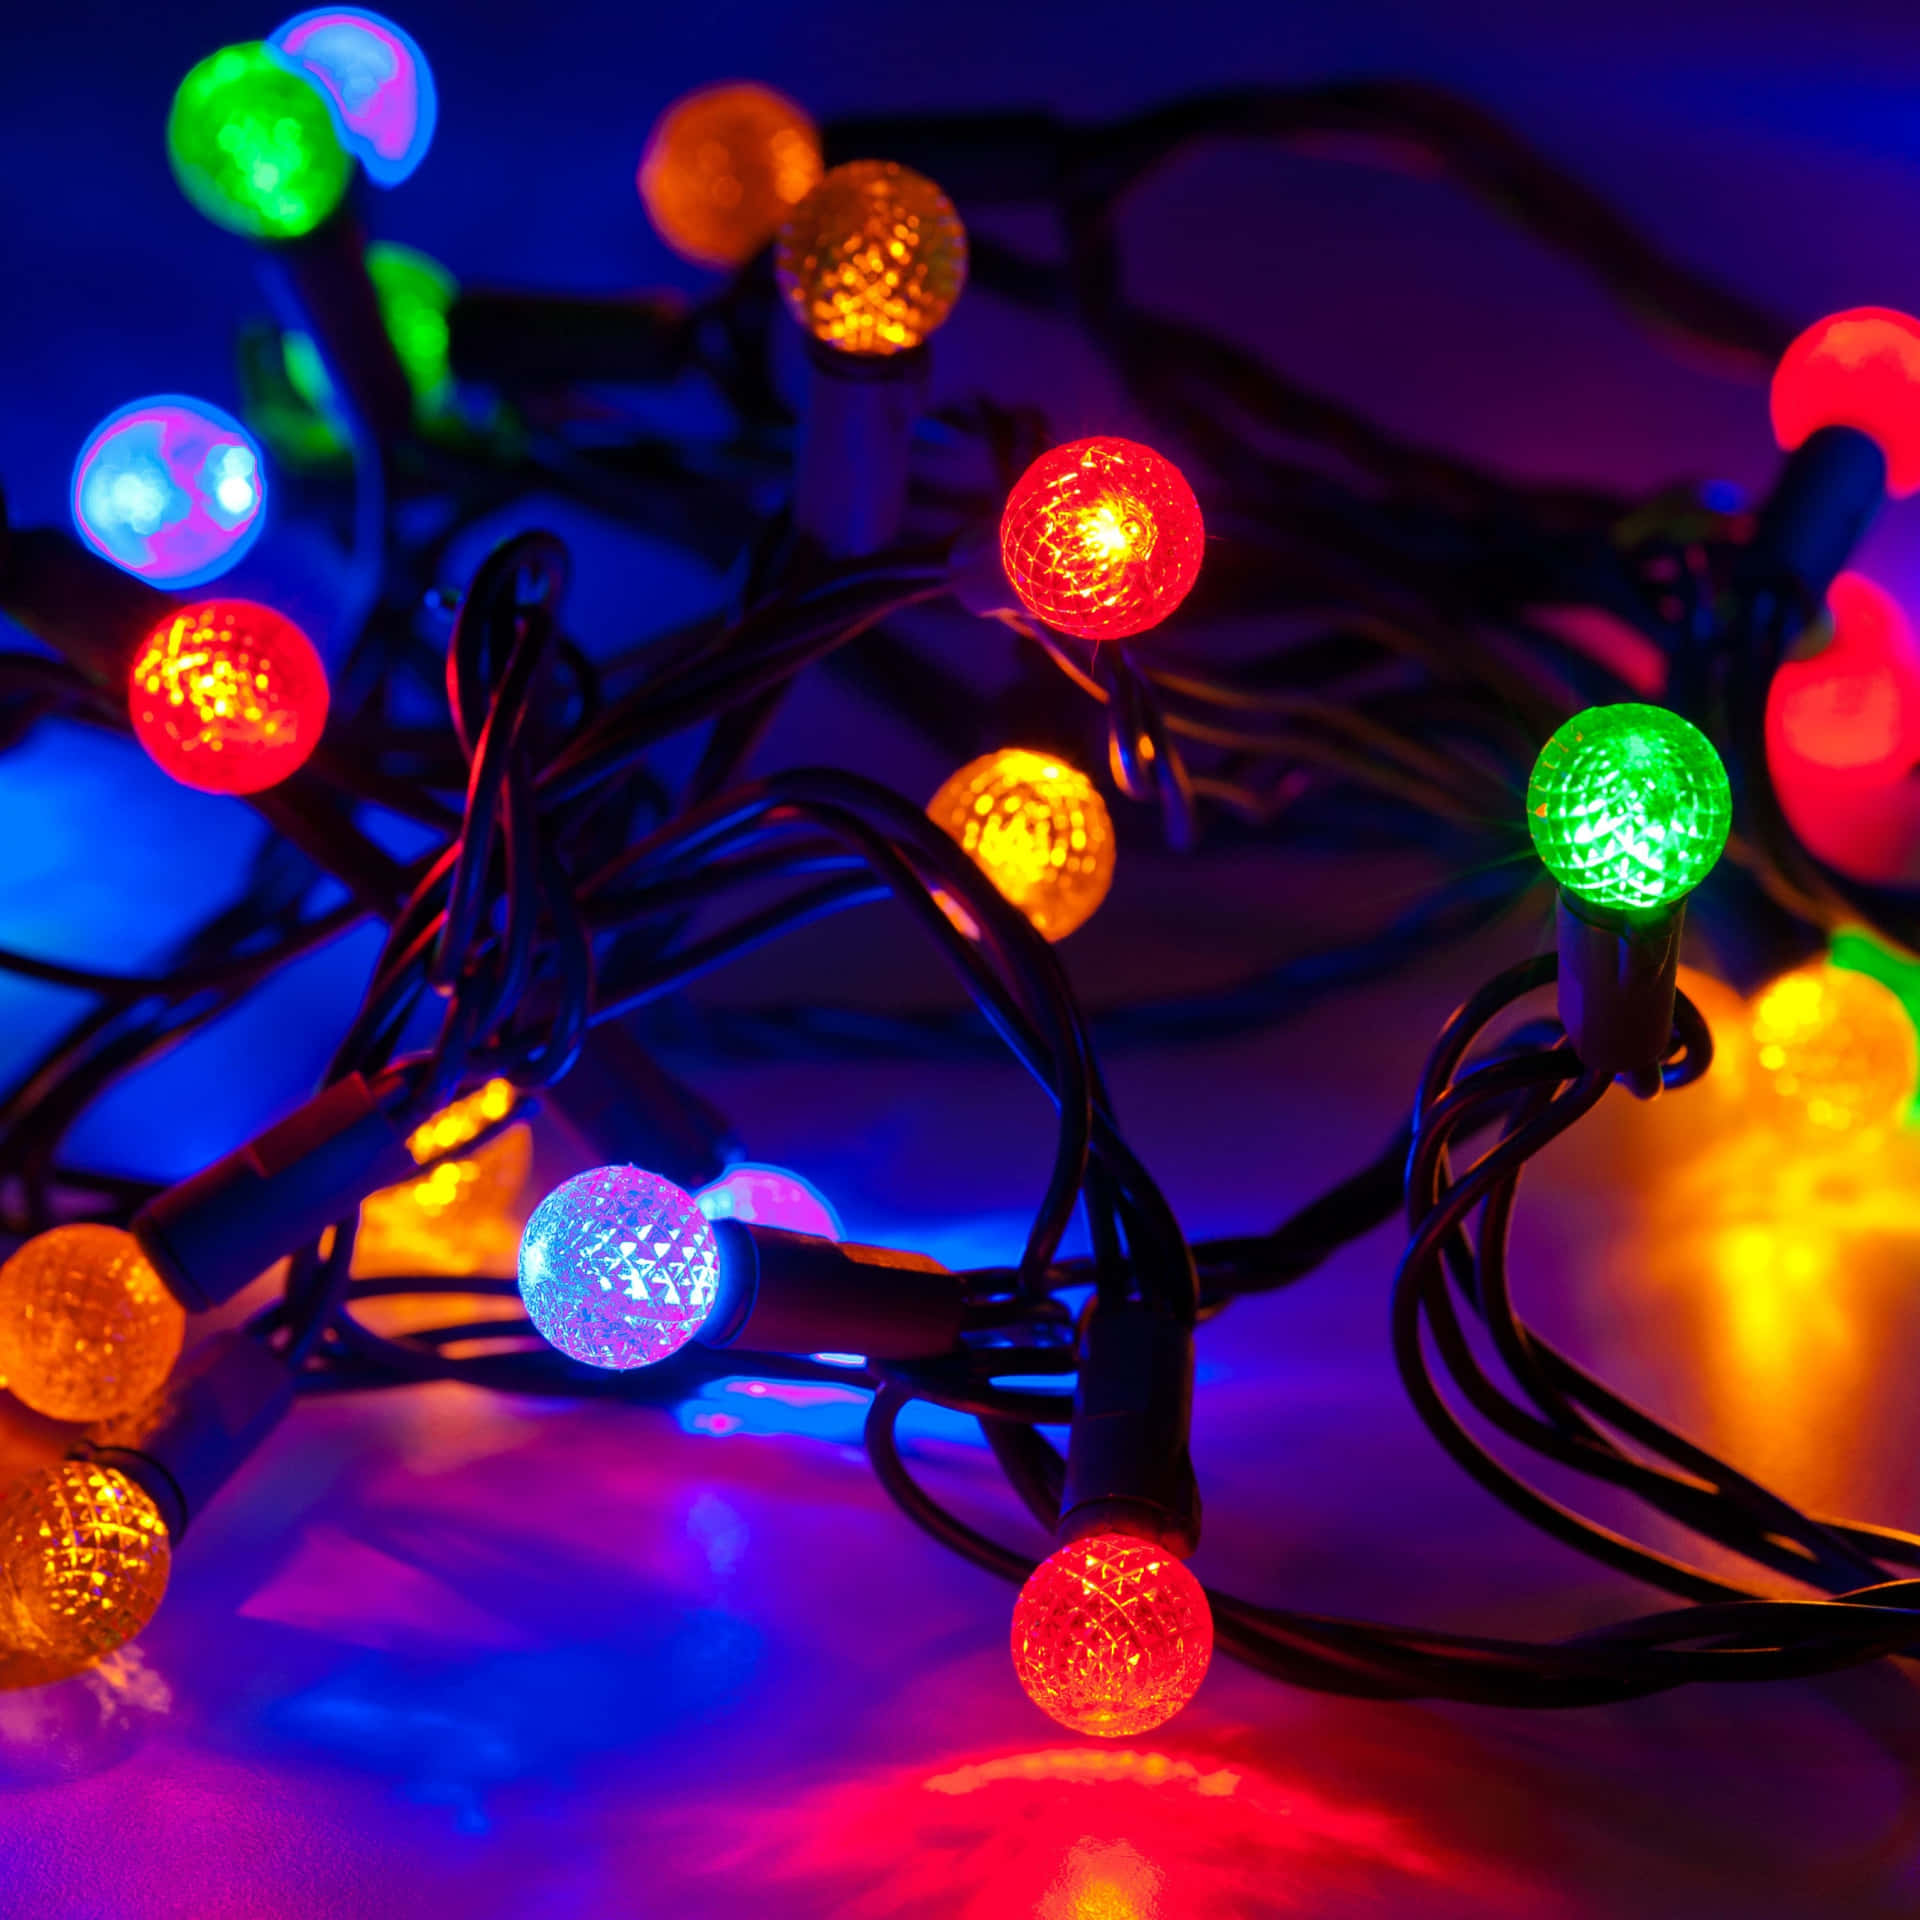 Colorful Party Lights Glowing Wallpaper